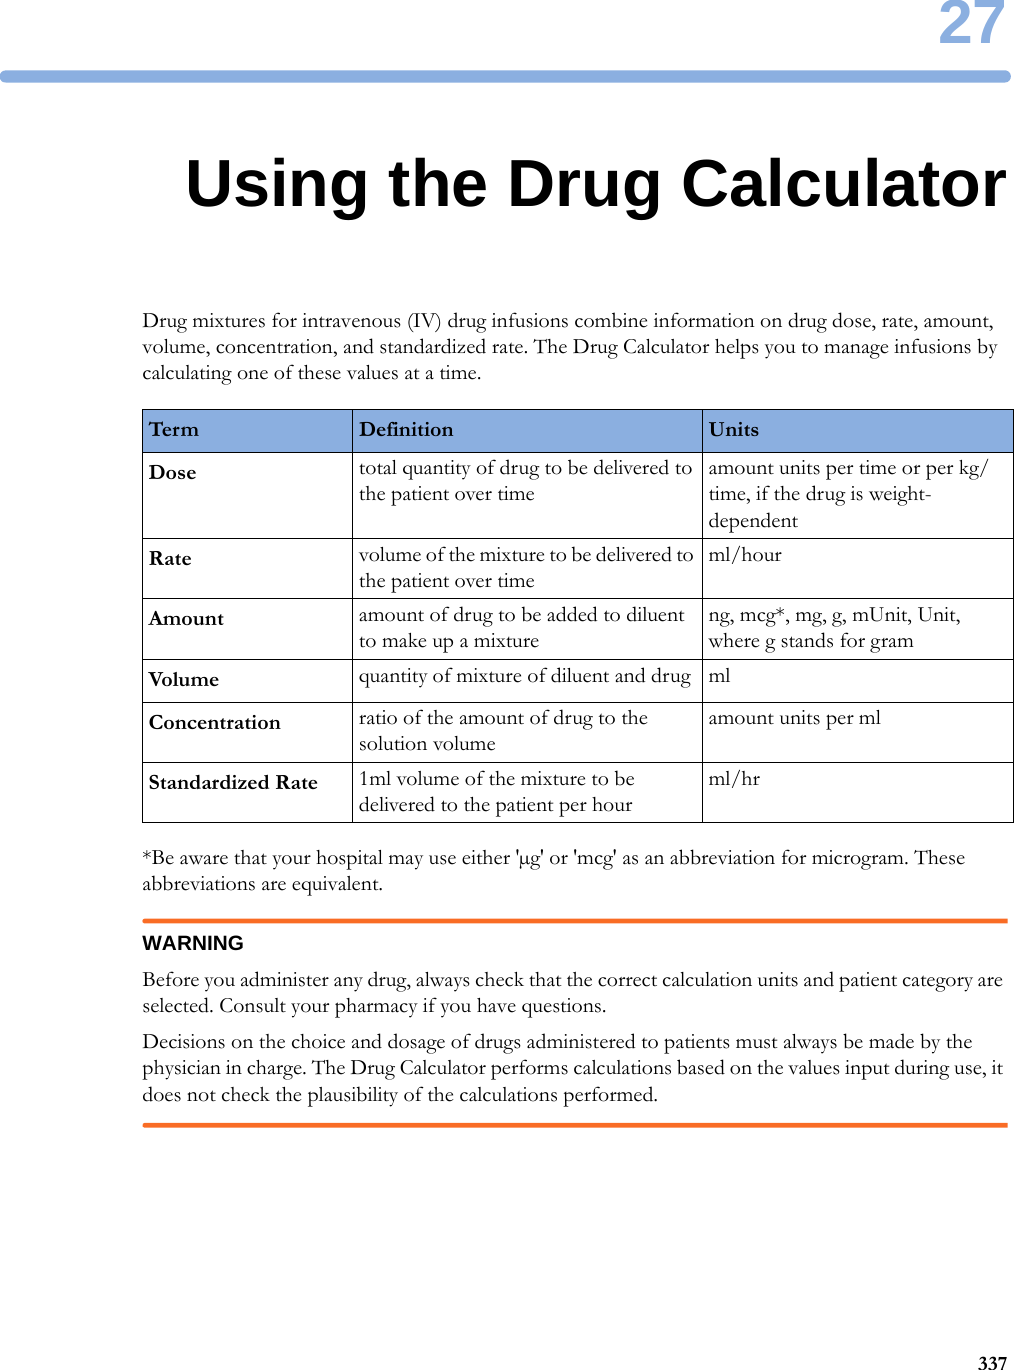 2733727Using the Drug CalculatorDrug mixtures for intravenous (IV) drug infusions combine information on drug dose, rate, amount, volume, concentration, and standardized rate. The Drug Calculator helps you to manage infusions by calculating one of these values at a time.*Be aware that your hospital may use either &apos;µg&apos; or &apos;mcg&apos; as an abbreviation for microgram. These abbreviations are equivalent.WARNINGBefore you administer any drug, always check that the correct calculation units and patient category are selected. Consult your pharmacy if you have questions.Decisions on the choice and dosage of drugs administered to patients must always be made by the physician in charge. The Drug Calculator performs calculations based on the values input during use, it does not check the plausibility of the calculations performed.Ter m Definition UnitsDose total quantity of drug to be delivered to the patient over timeamount units per time or per kg/time, if the drug is weight-dependentRate volume of the mixture to be delivered to the patient over timeml/hourAmount amount of drug to be added to diluent to make up a mixtureng, mcg*, mg, g, mUnit, Unit, where g stands for gramVolume quantity of mixture of diluent and drug mlConcentration ratio of the amount of drug to the solution volumeamount units per mlStandardized Rate 1ml volume of the mixture to be delivered to the patient per hourml/hr